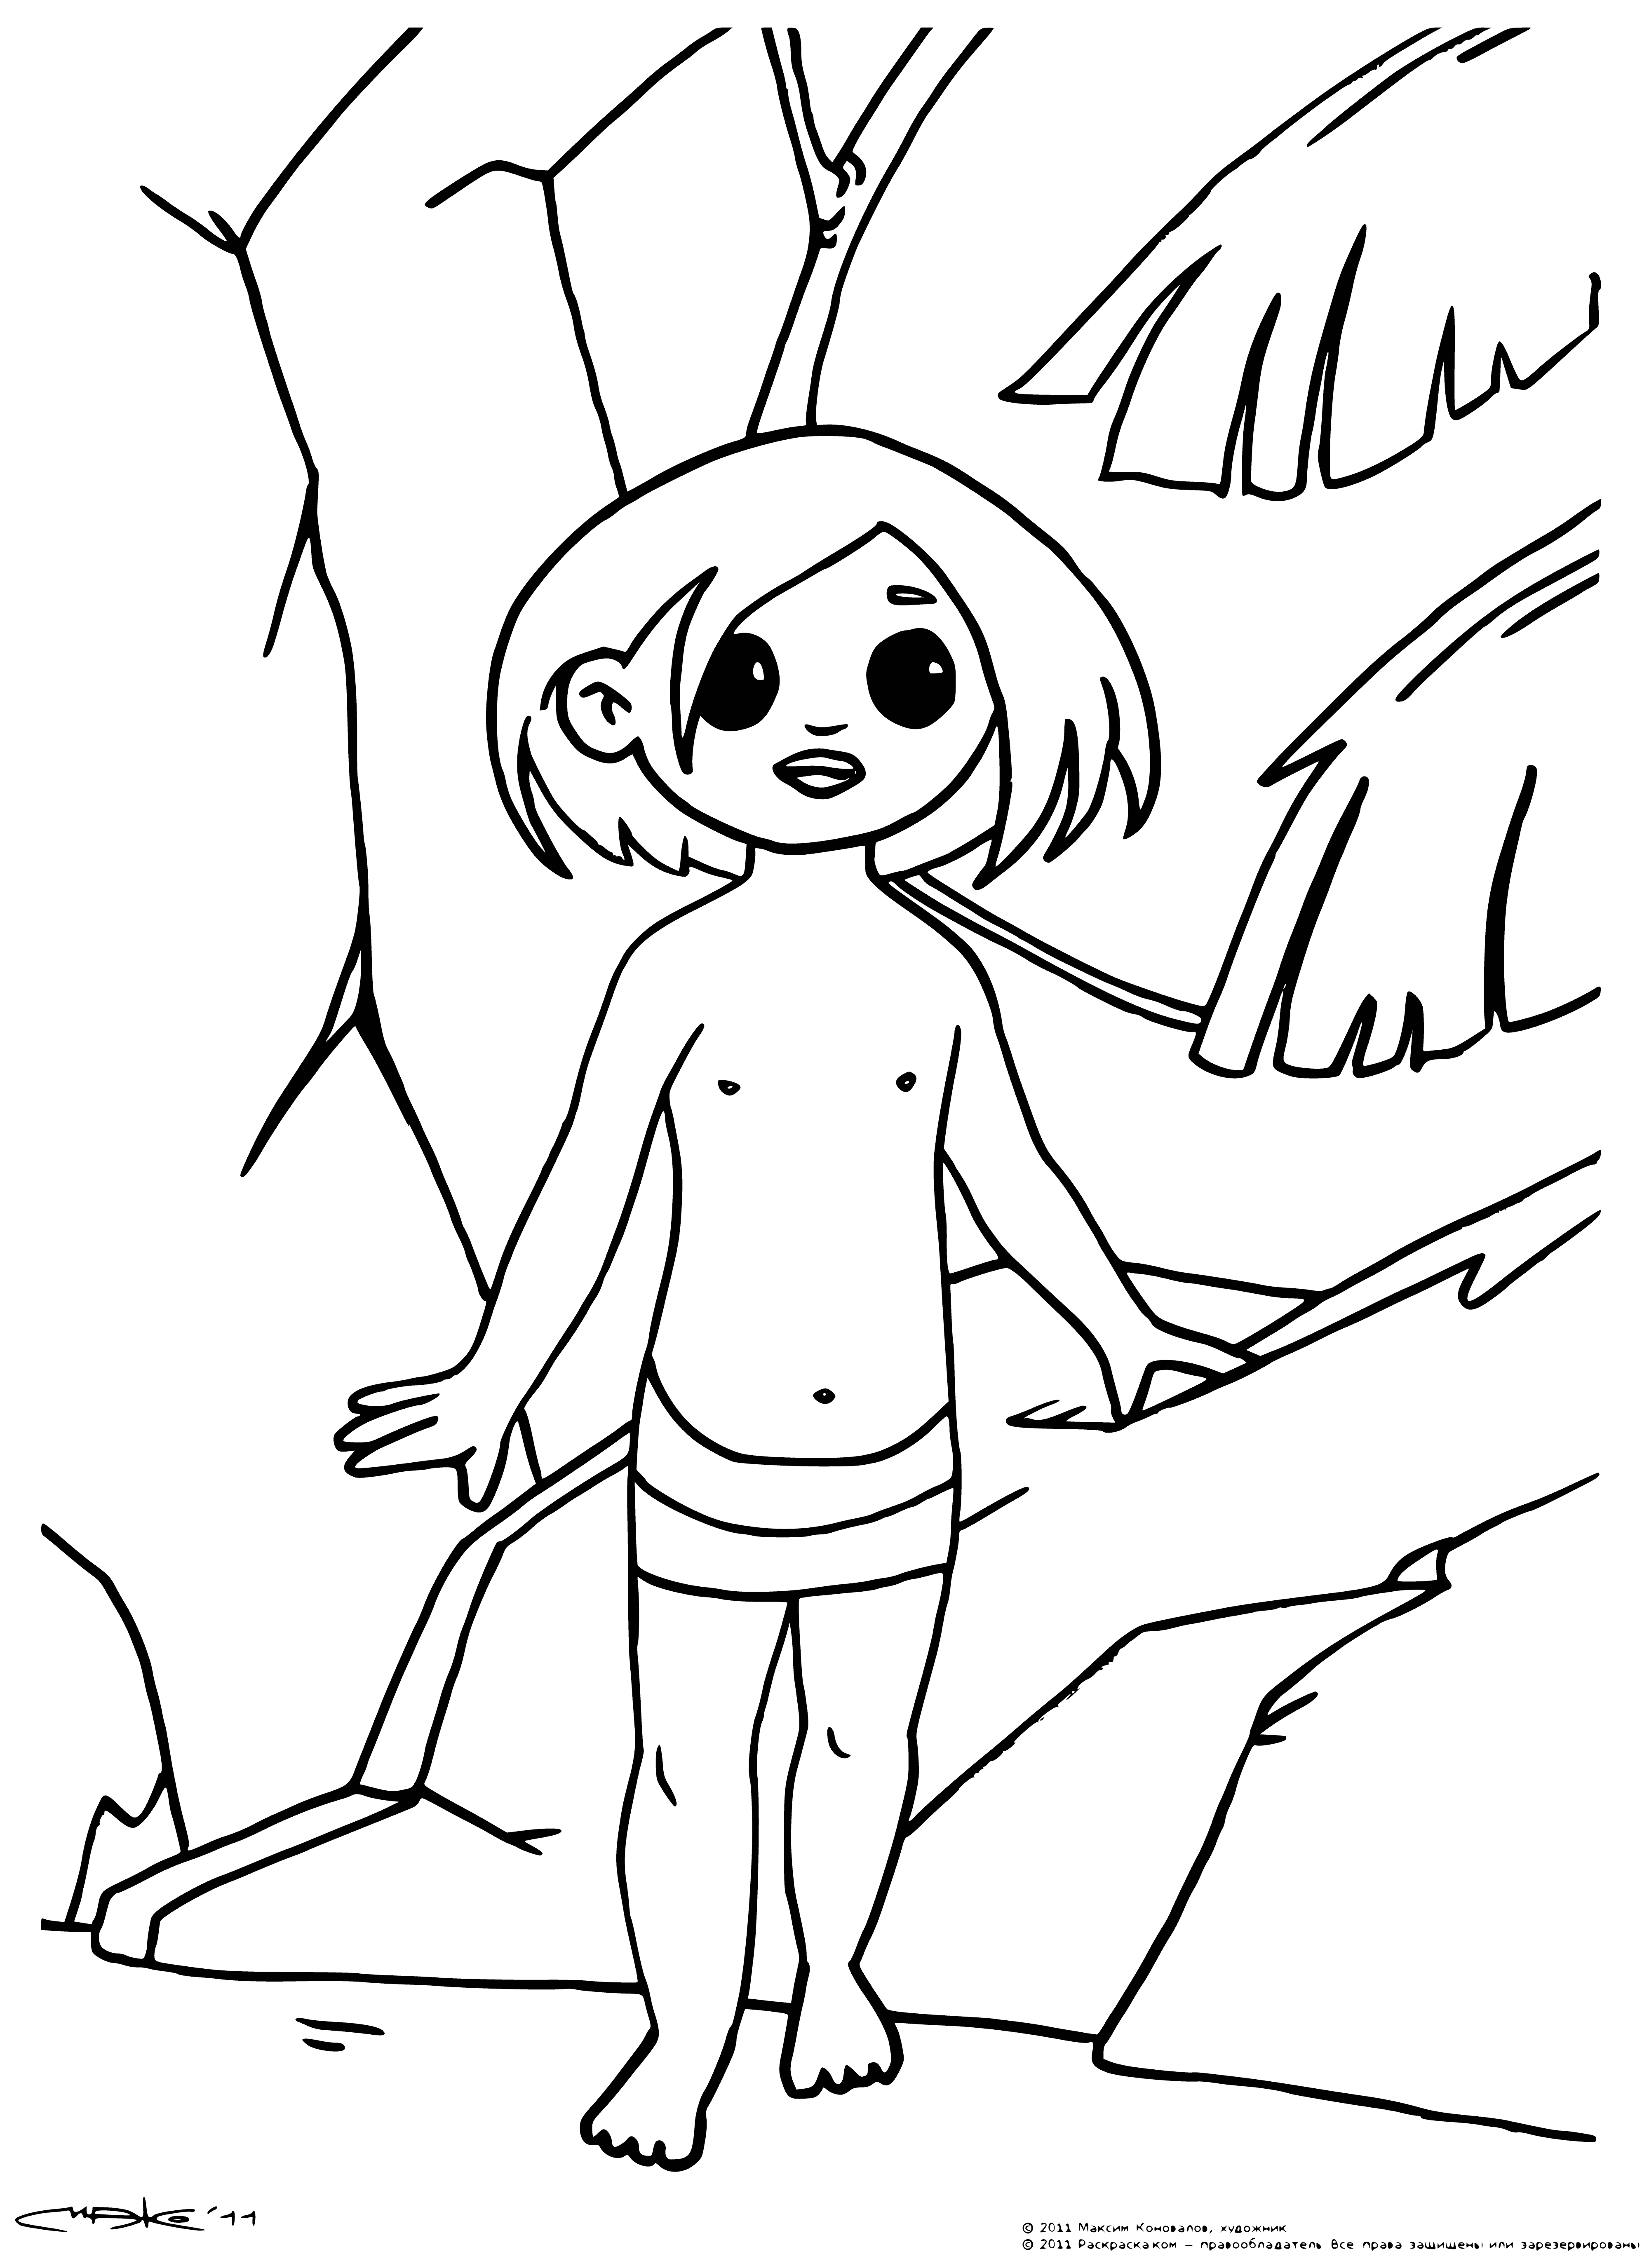 coloring page: Boy stands in jungle clearing wearing loincloth, knife in right hand, fist raised. Determined expression on face.